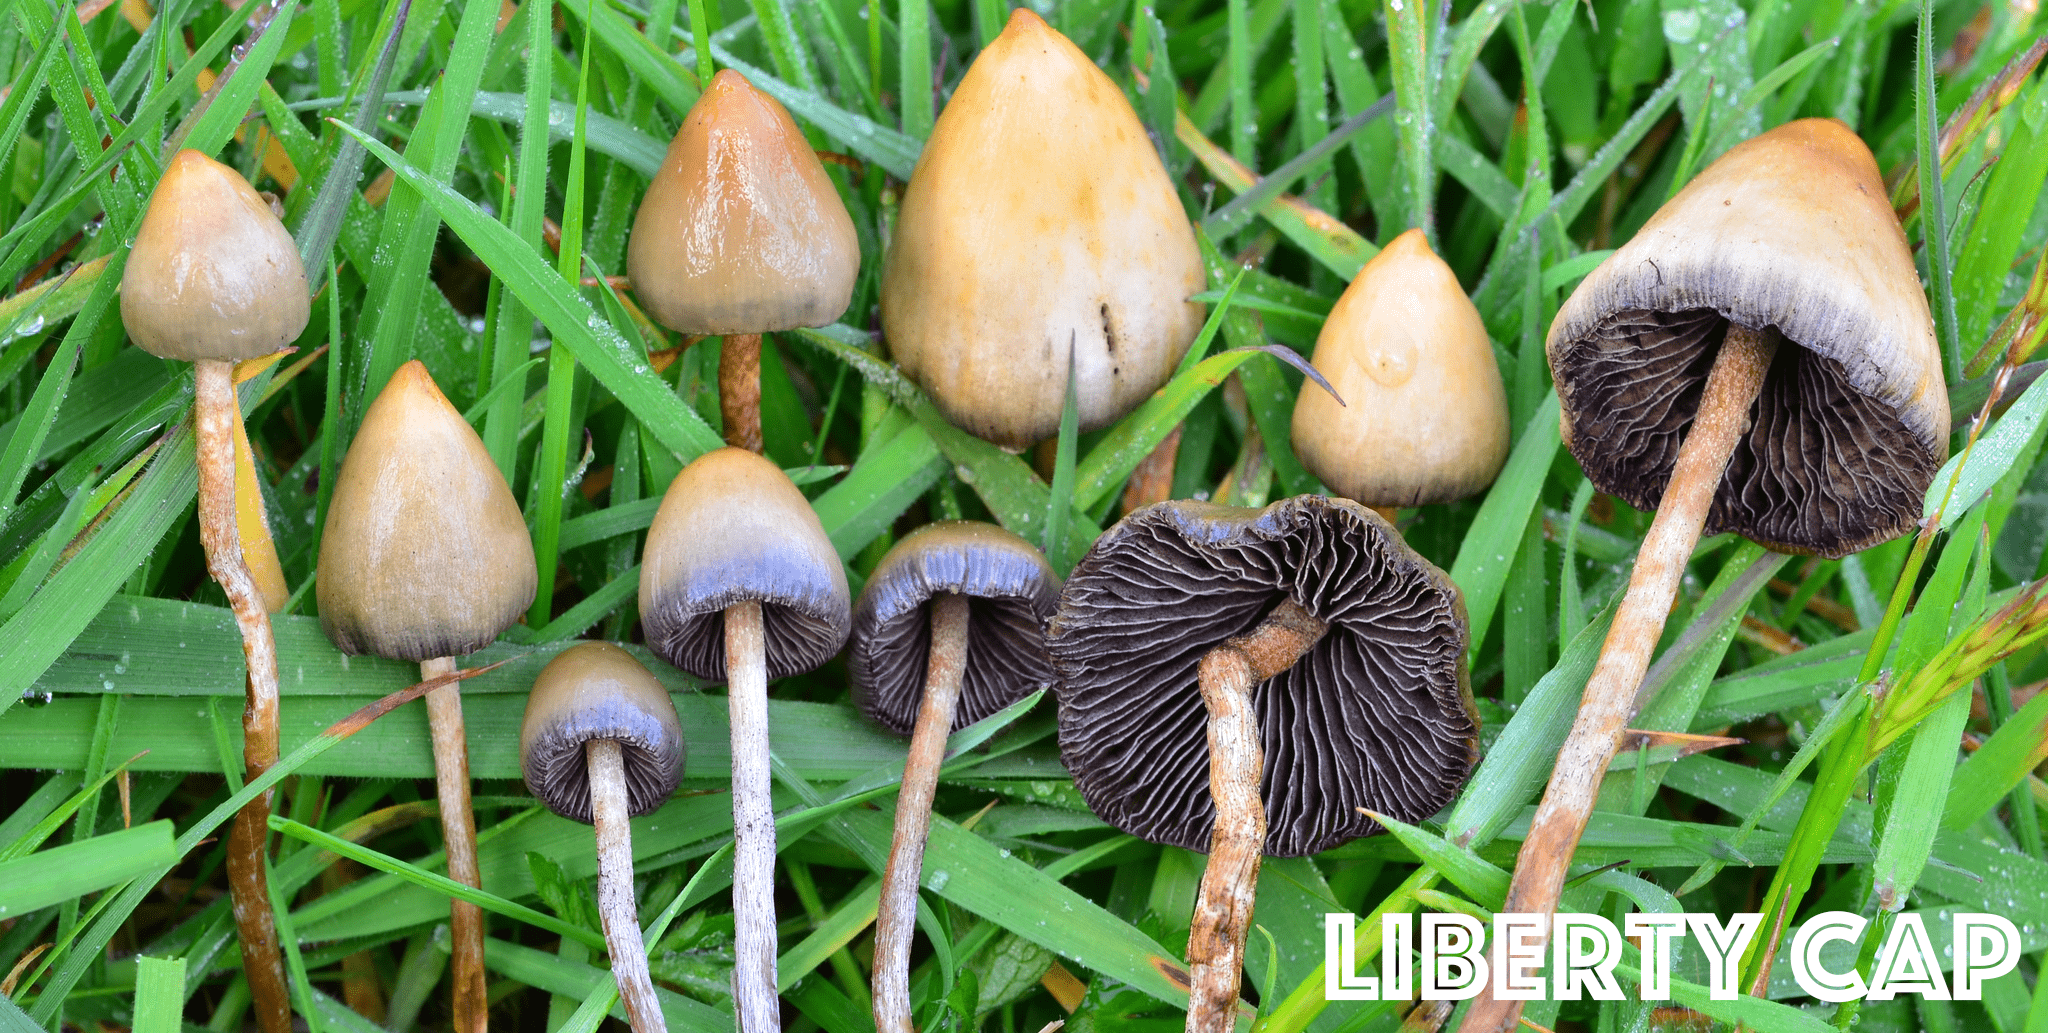 magic mushrooms that look like poisonous muchrooms